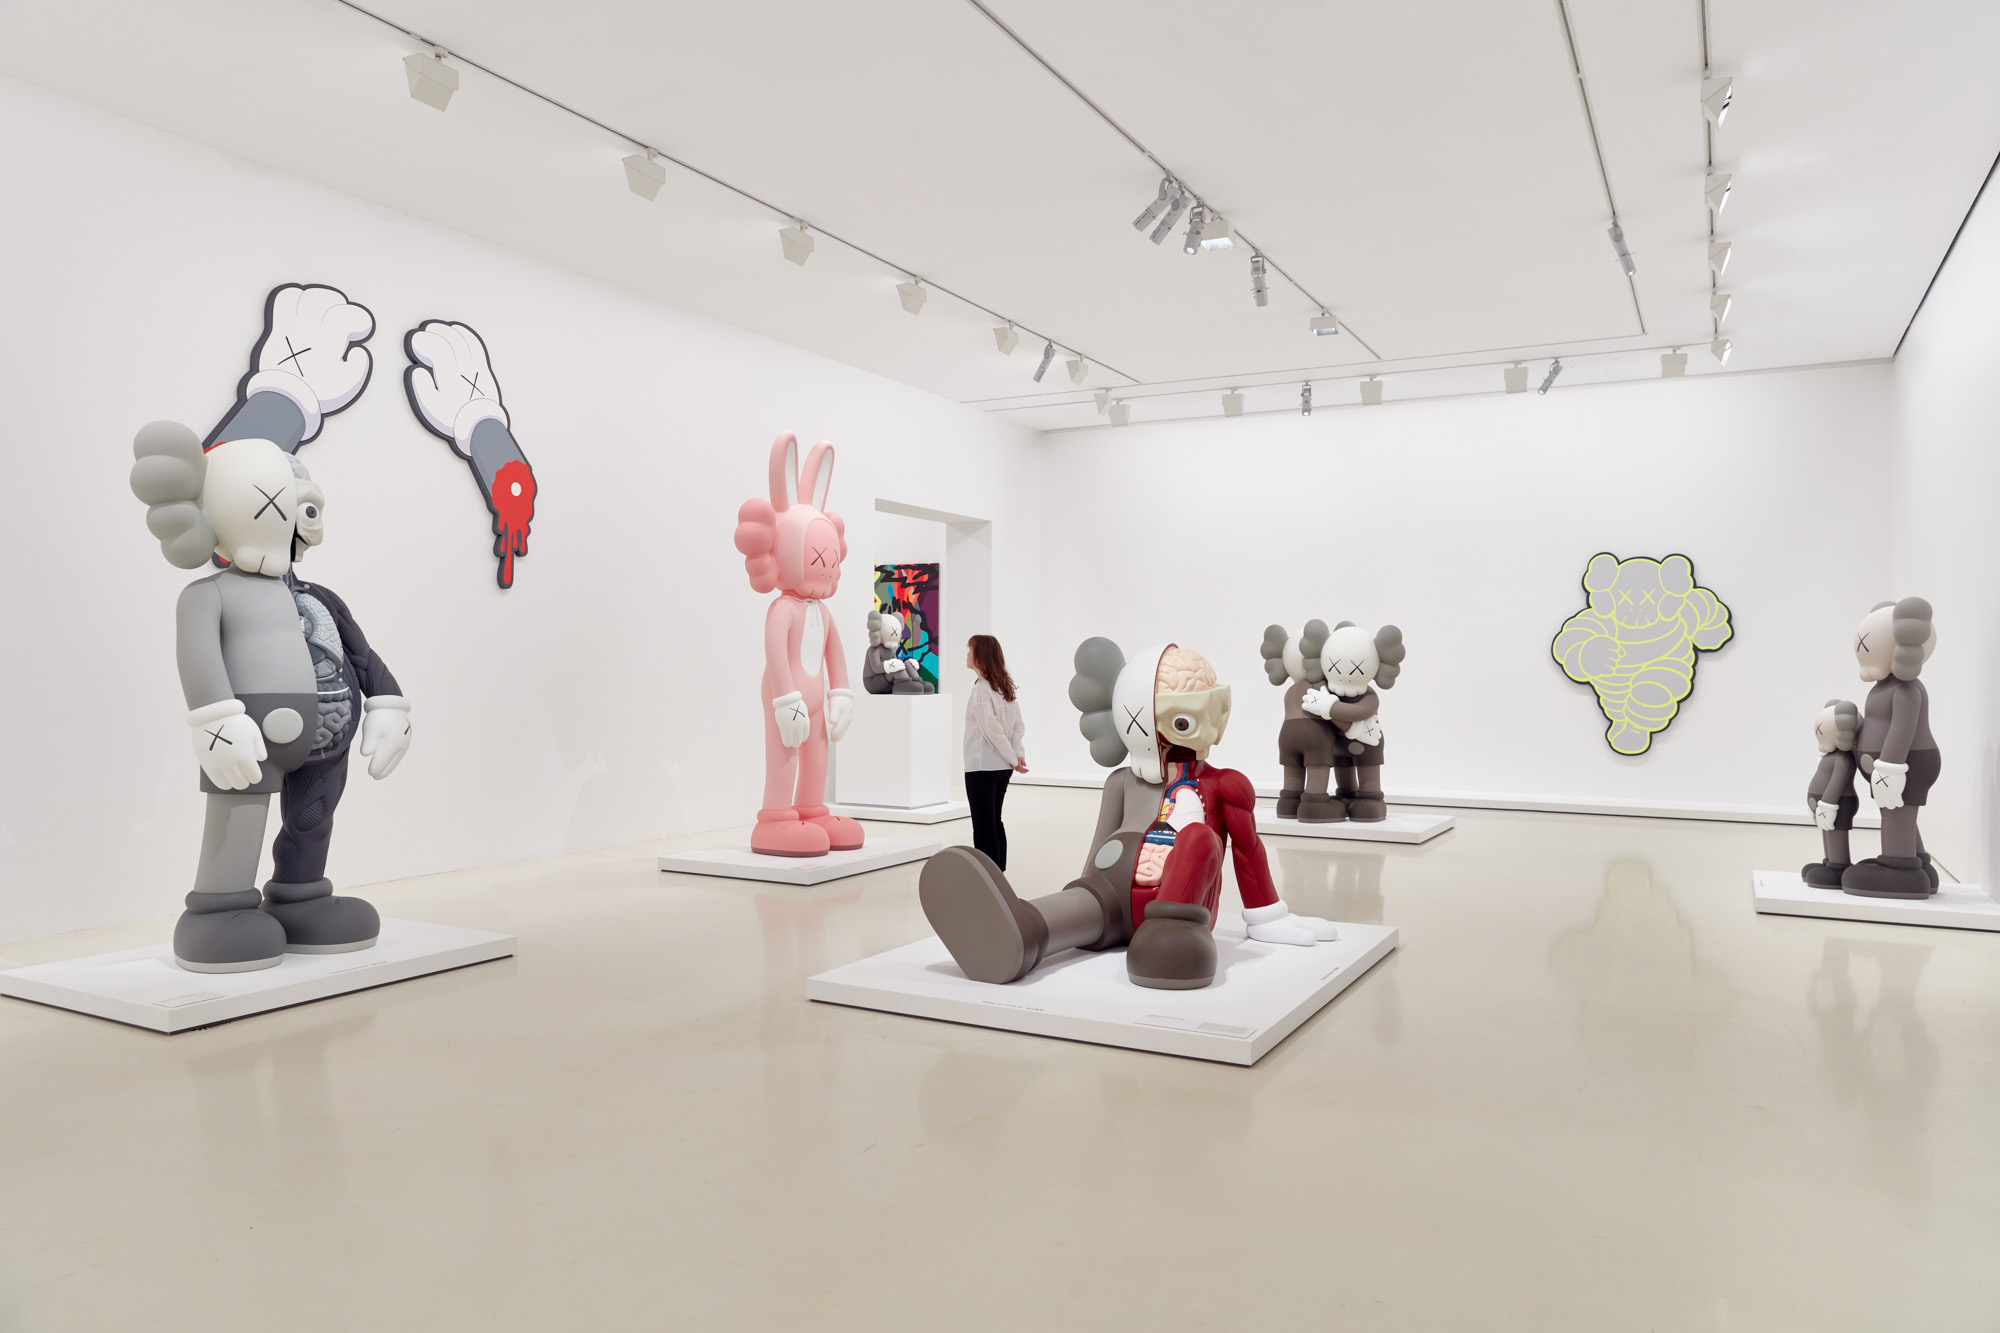 Installation view of <em>KAWS: Companionship in the Age of Loneliness</em> at NGV International, Melbourne 20 September 2019 – 13 April 2020. Photo © Tom Ross